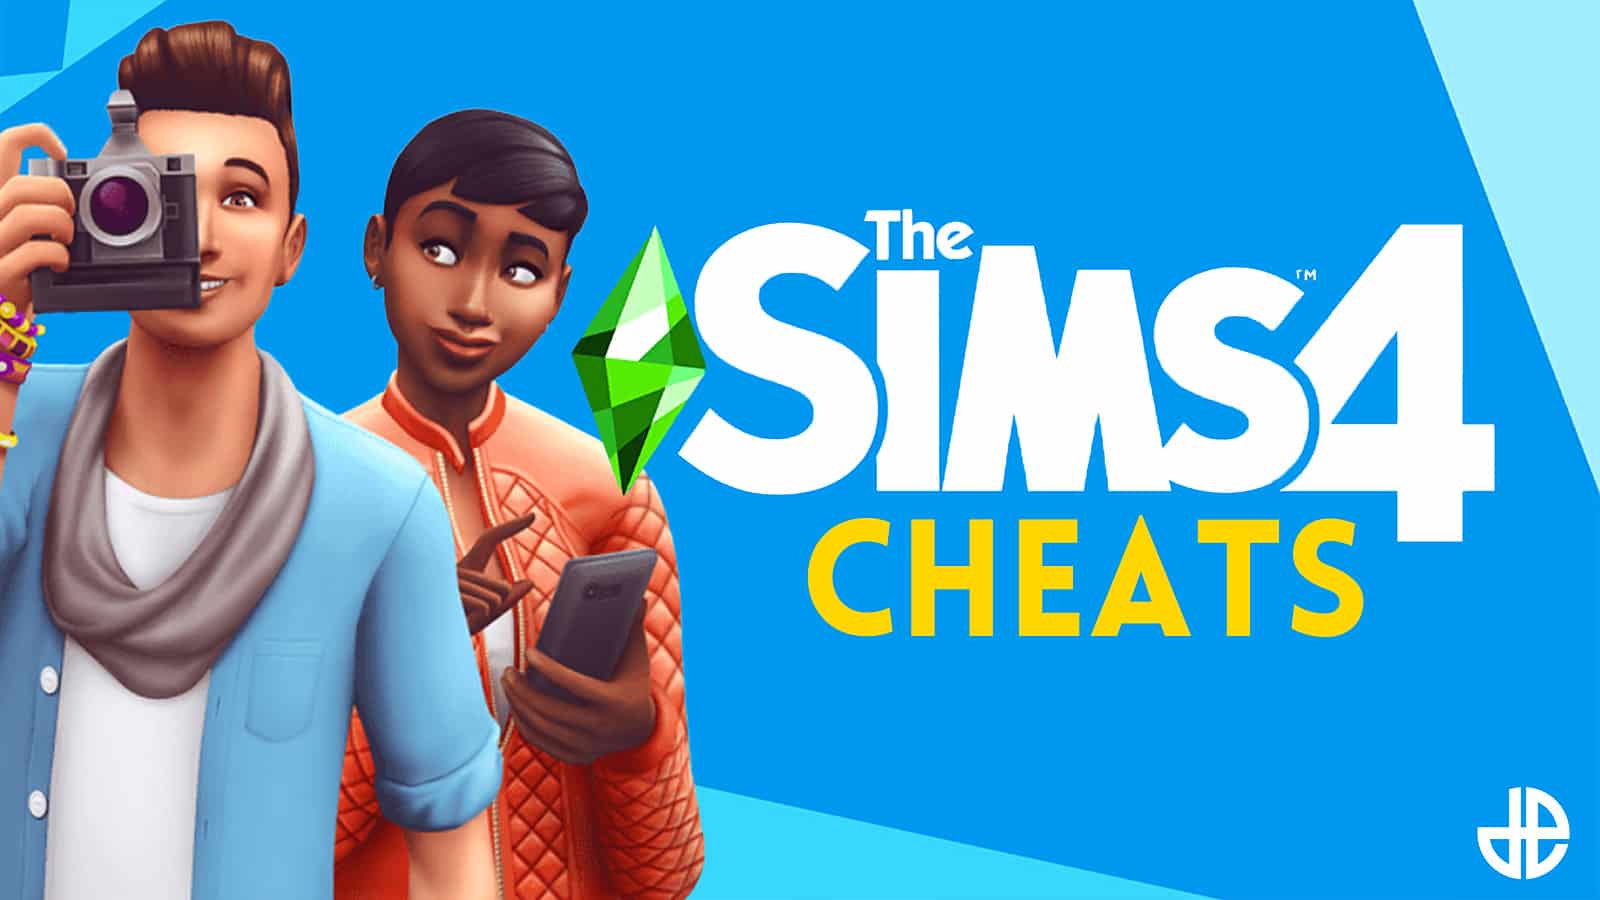 Sims 4 cheats: all cheat codes for PC, Xbox, PS4, PS5